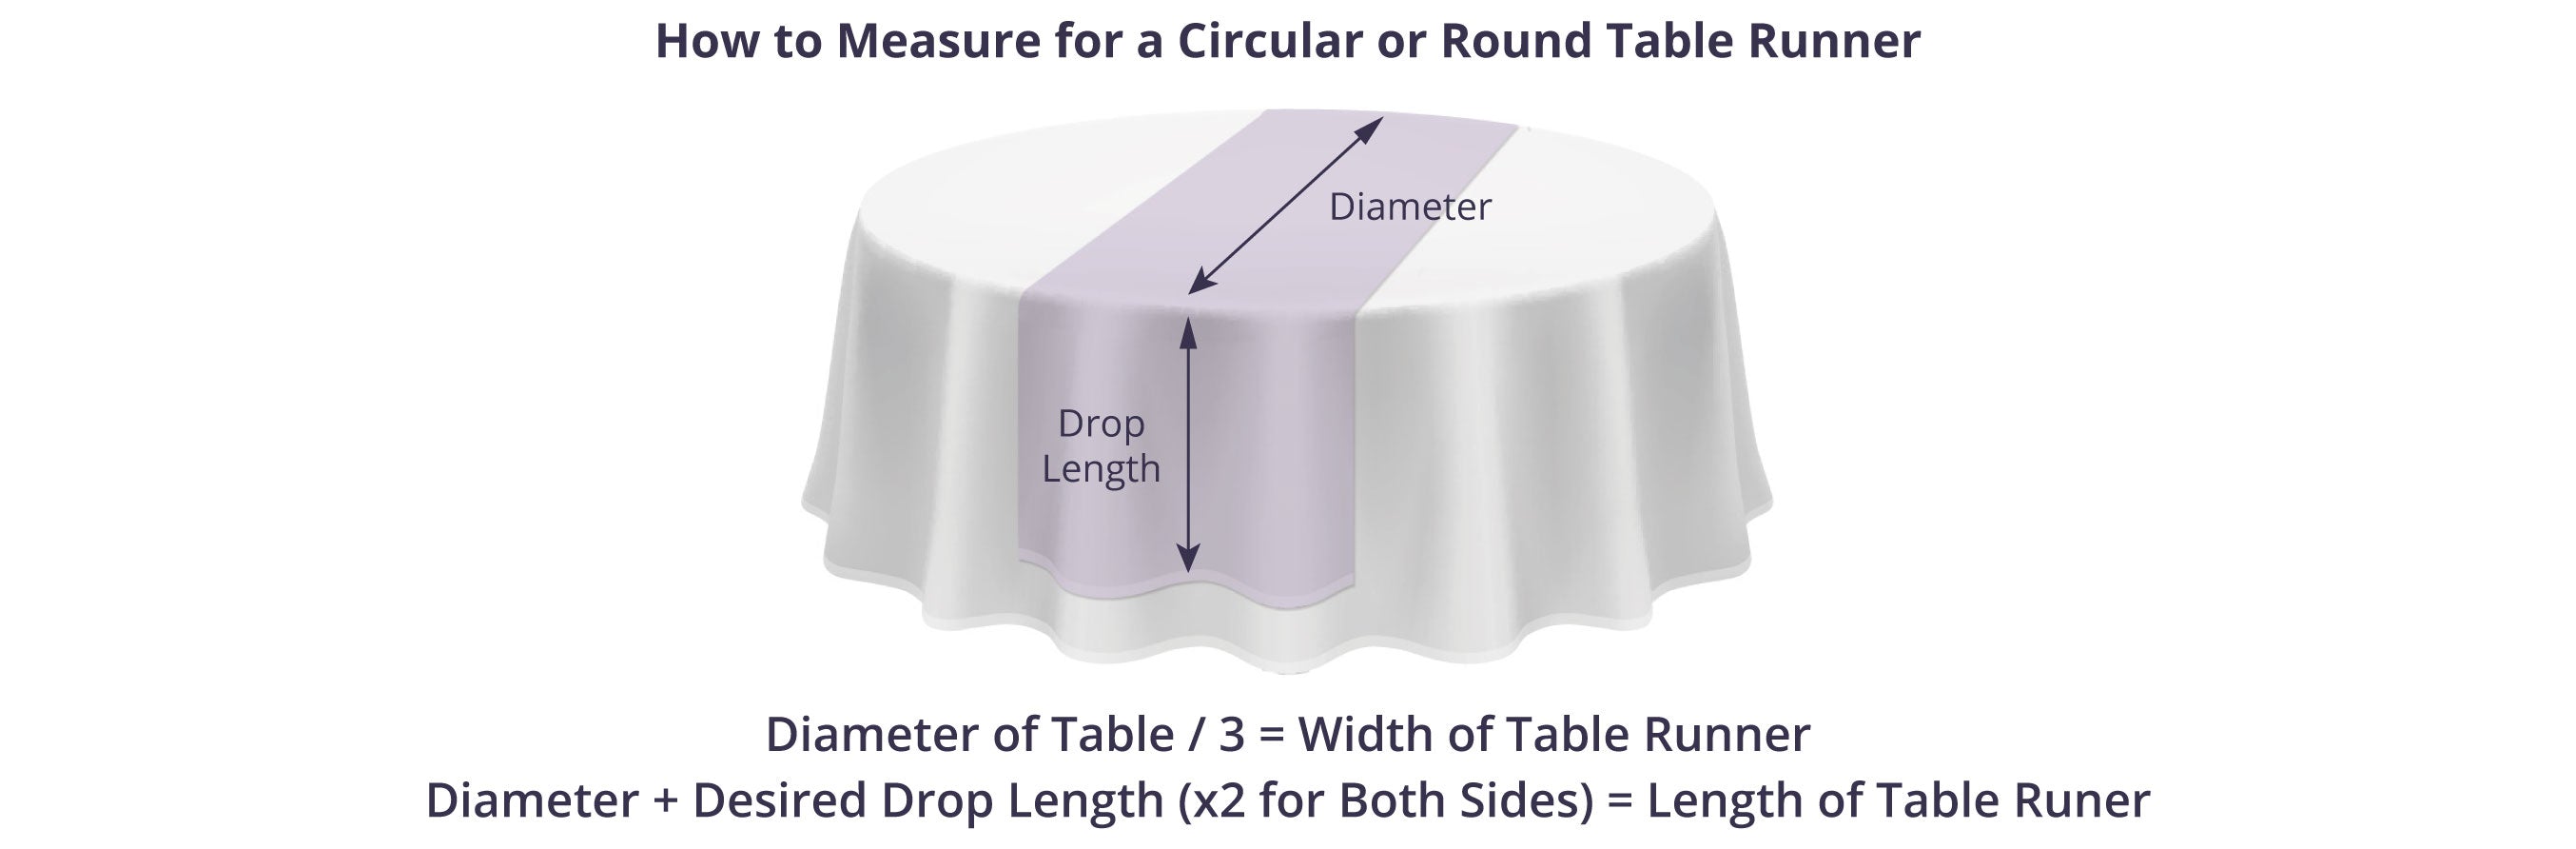 Measuring a Table Runner for a Round or Circular Table